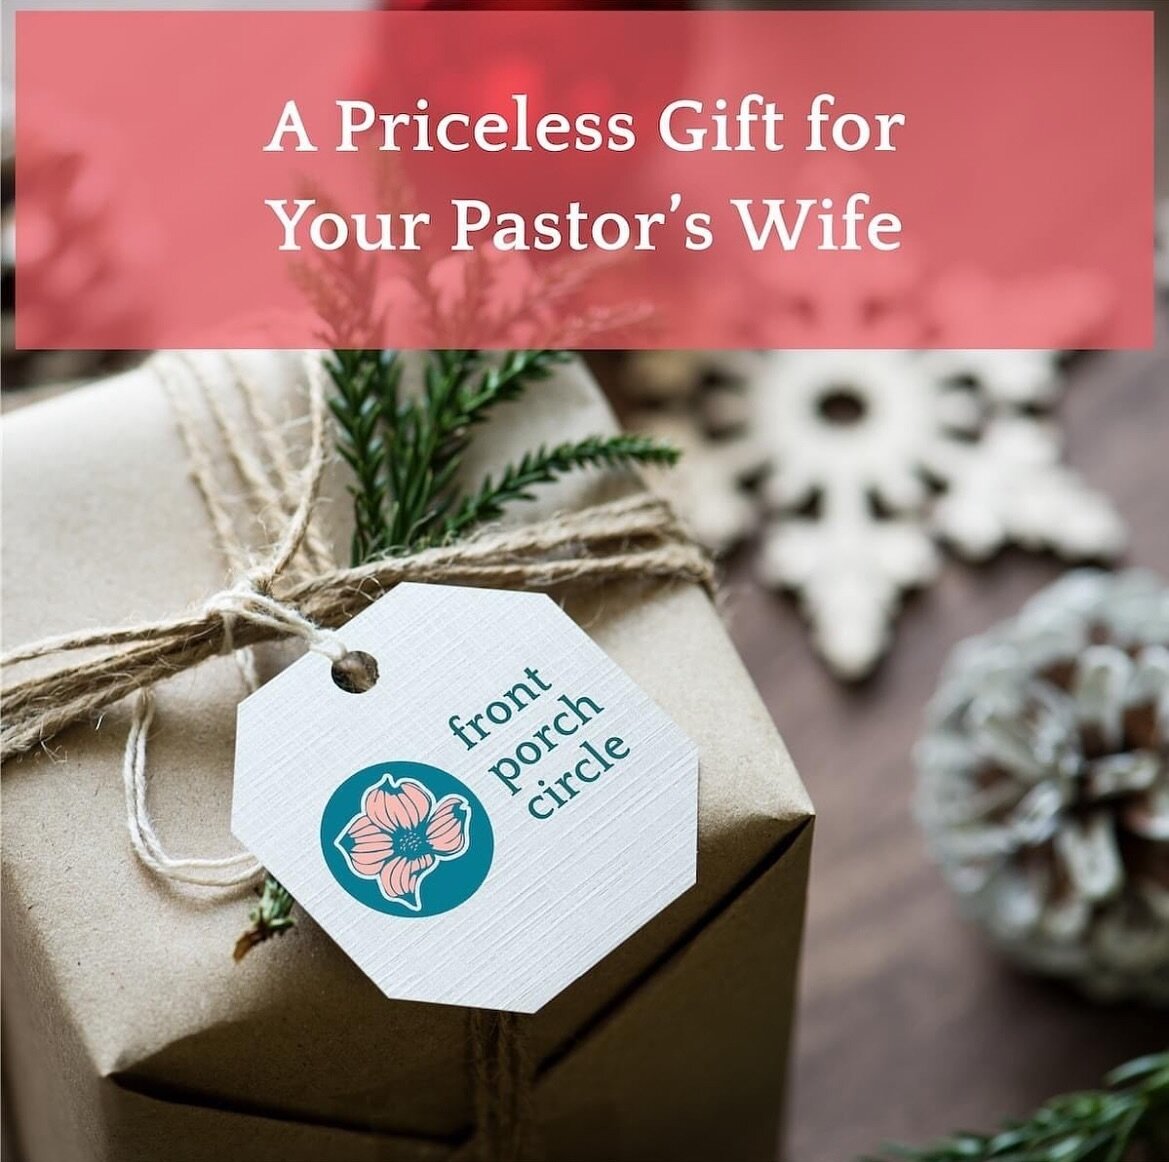 Consider the gift of Front Porch Circle for your Pastor&rsquo;s wife. Our next circle will start in January and meet once a month for two hours each month. See frontporchcircle.com or message me for more details!